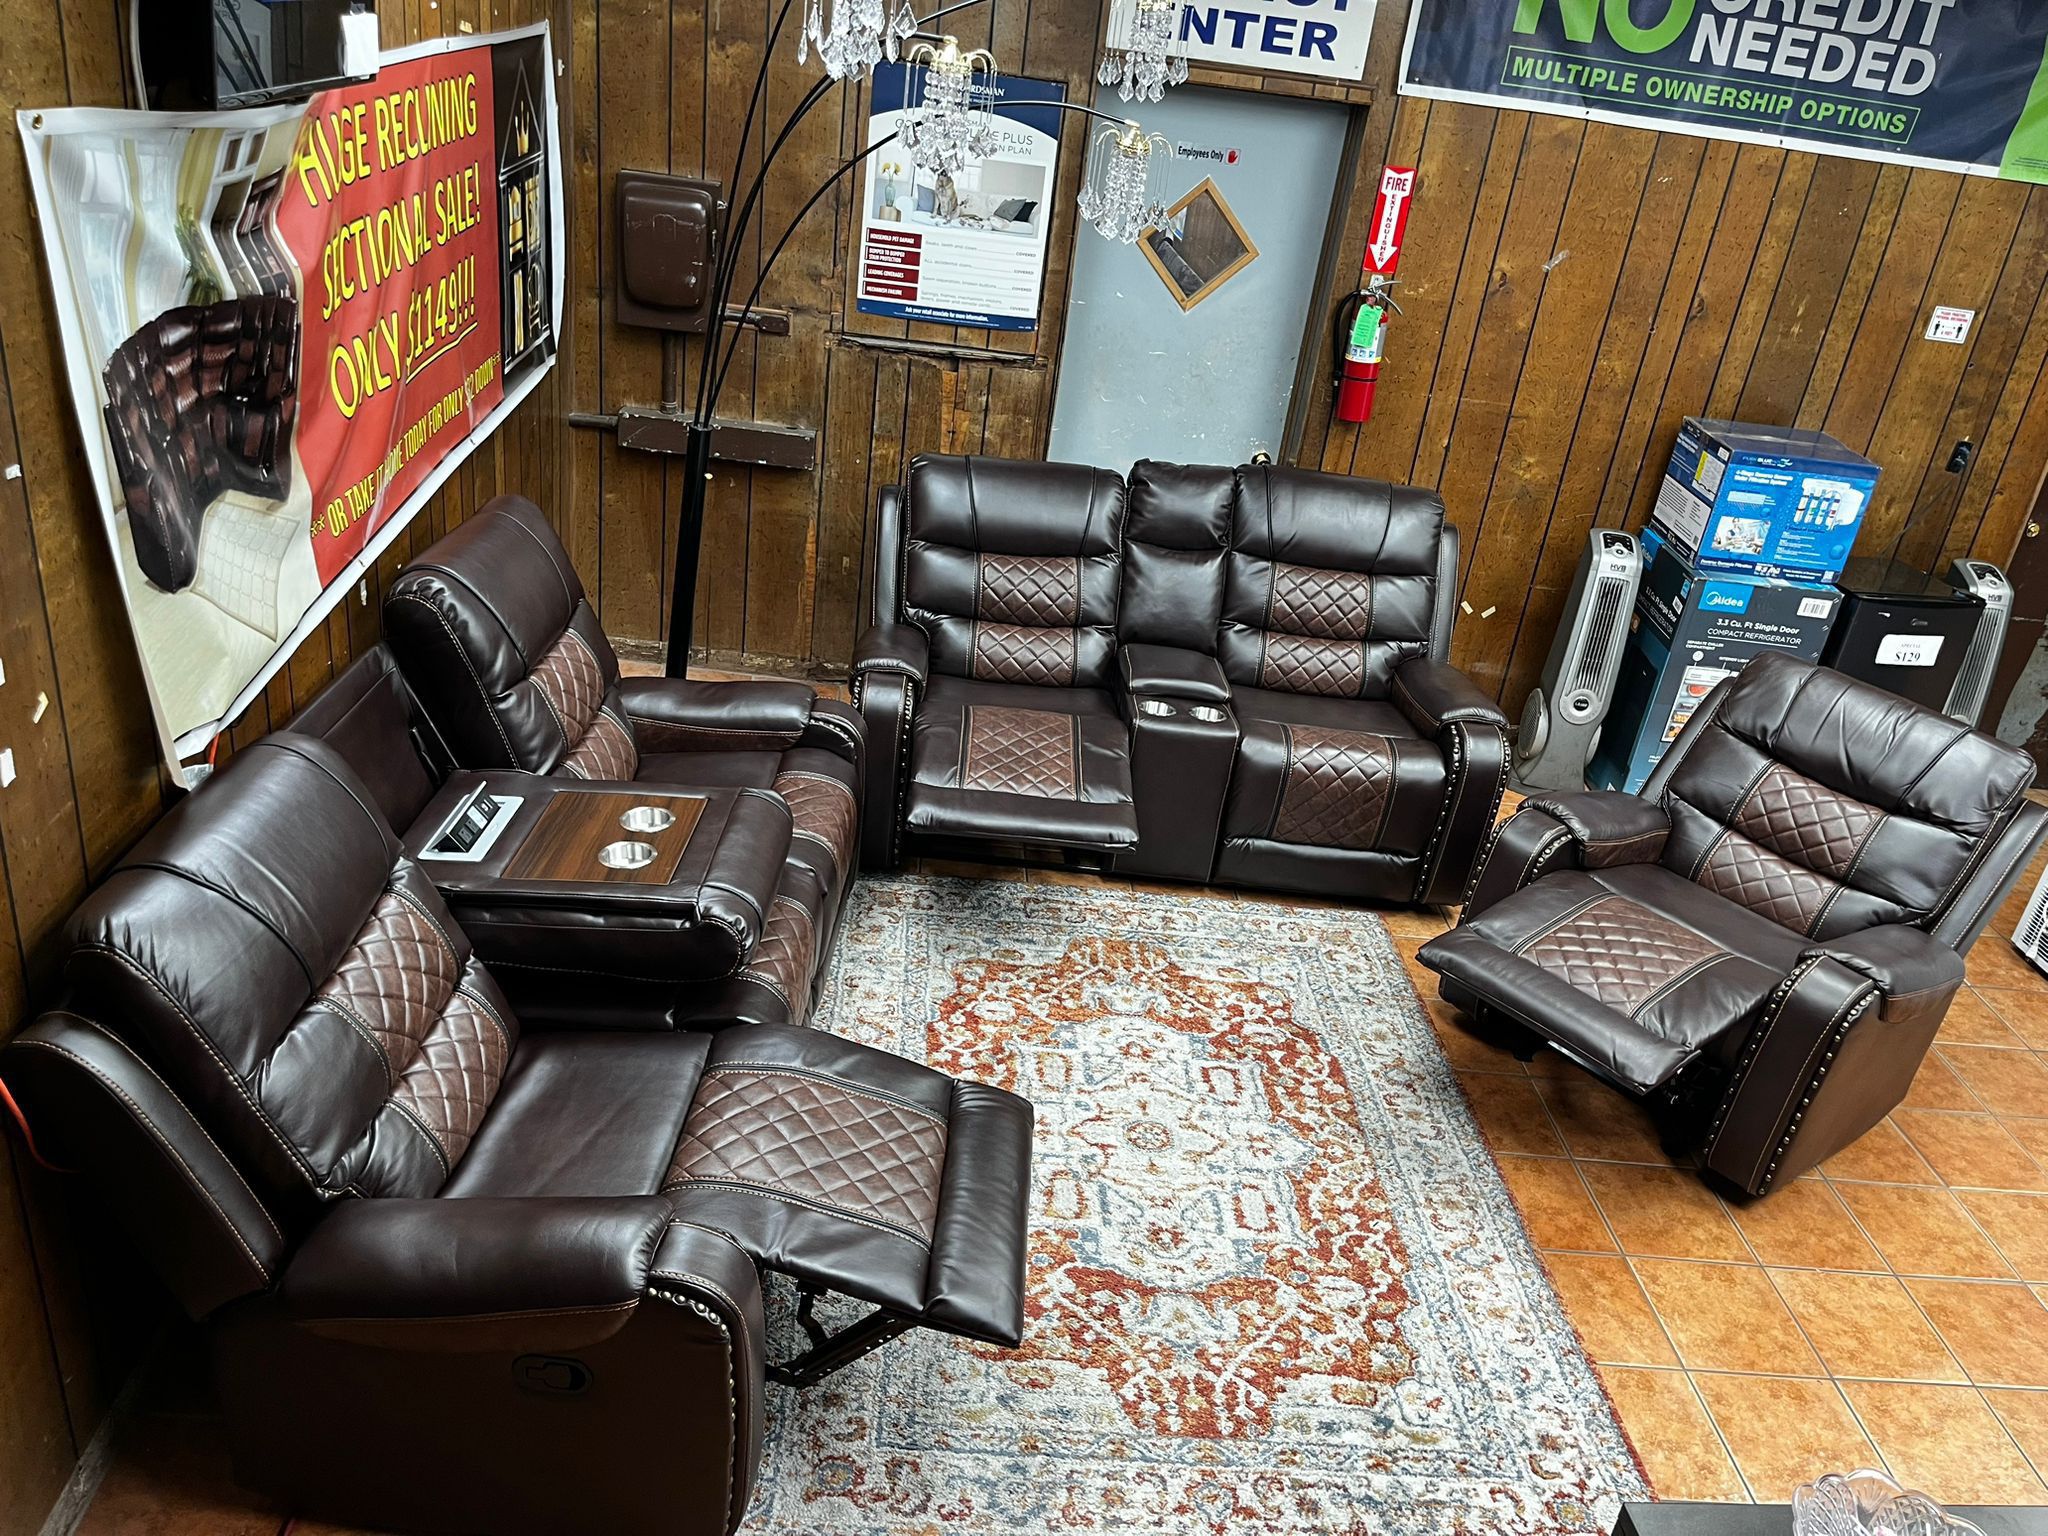 CLEARANCE SALE 3 Piece Recliner Sofa Loveseat and Chair Set $1349 DELIVERED TODAY